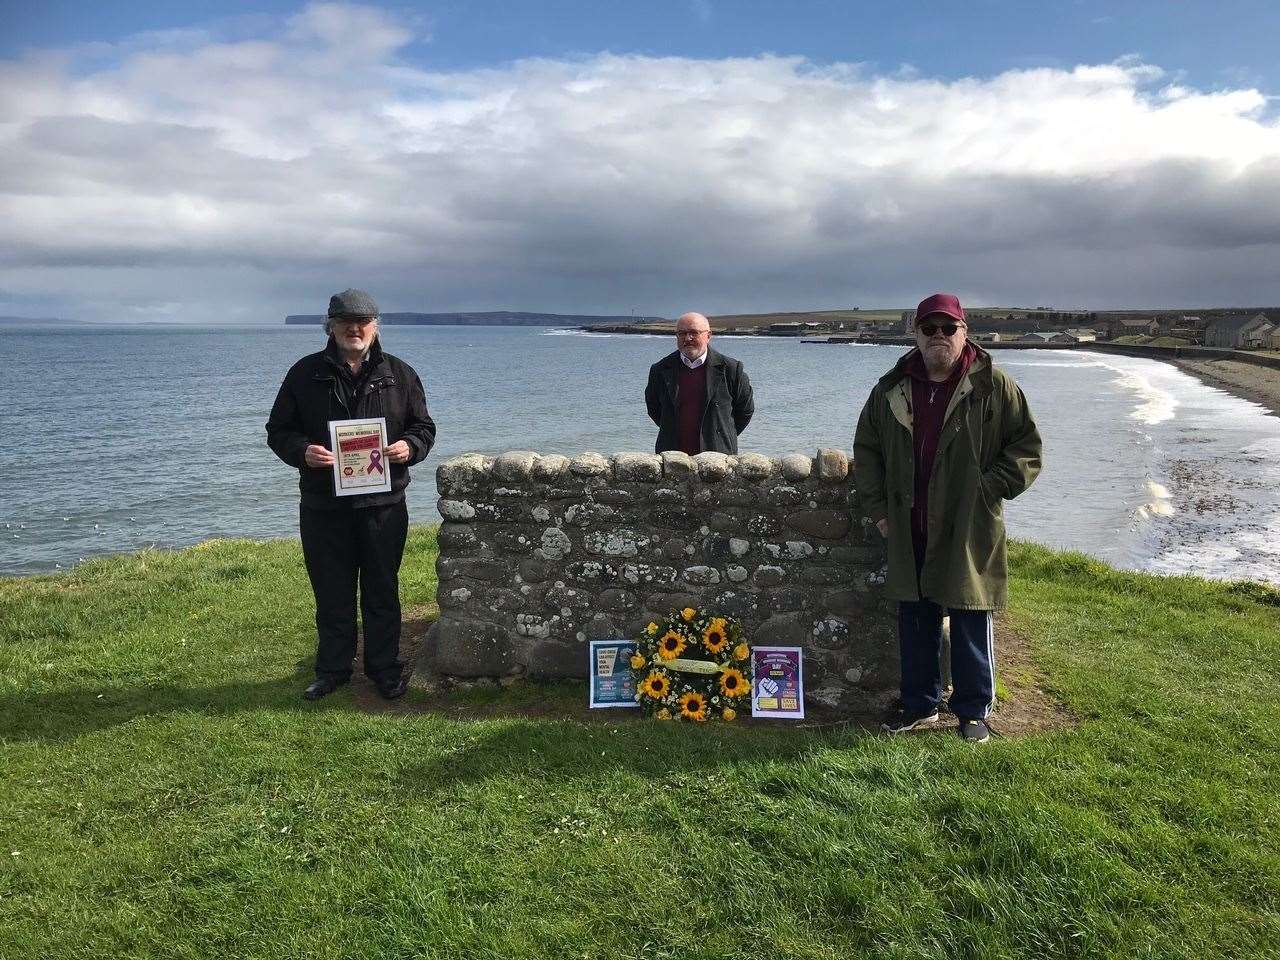 Attending the social distanced memorial to International Workers Memorial Day are (from left) TWTUC secretary John Deighan, chairman Davie Alexander and member James Higney.